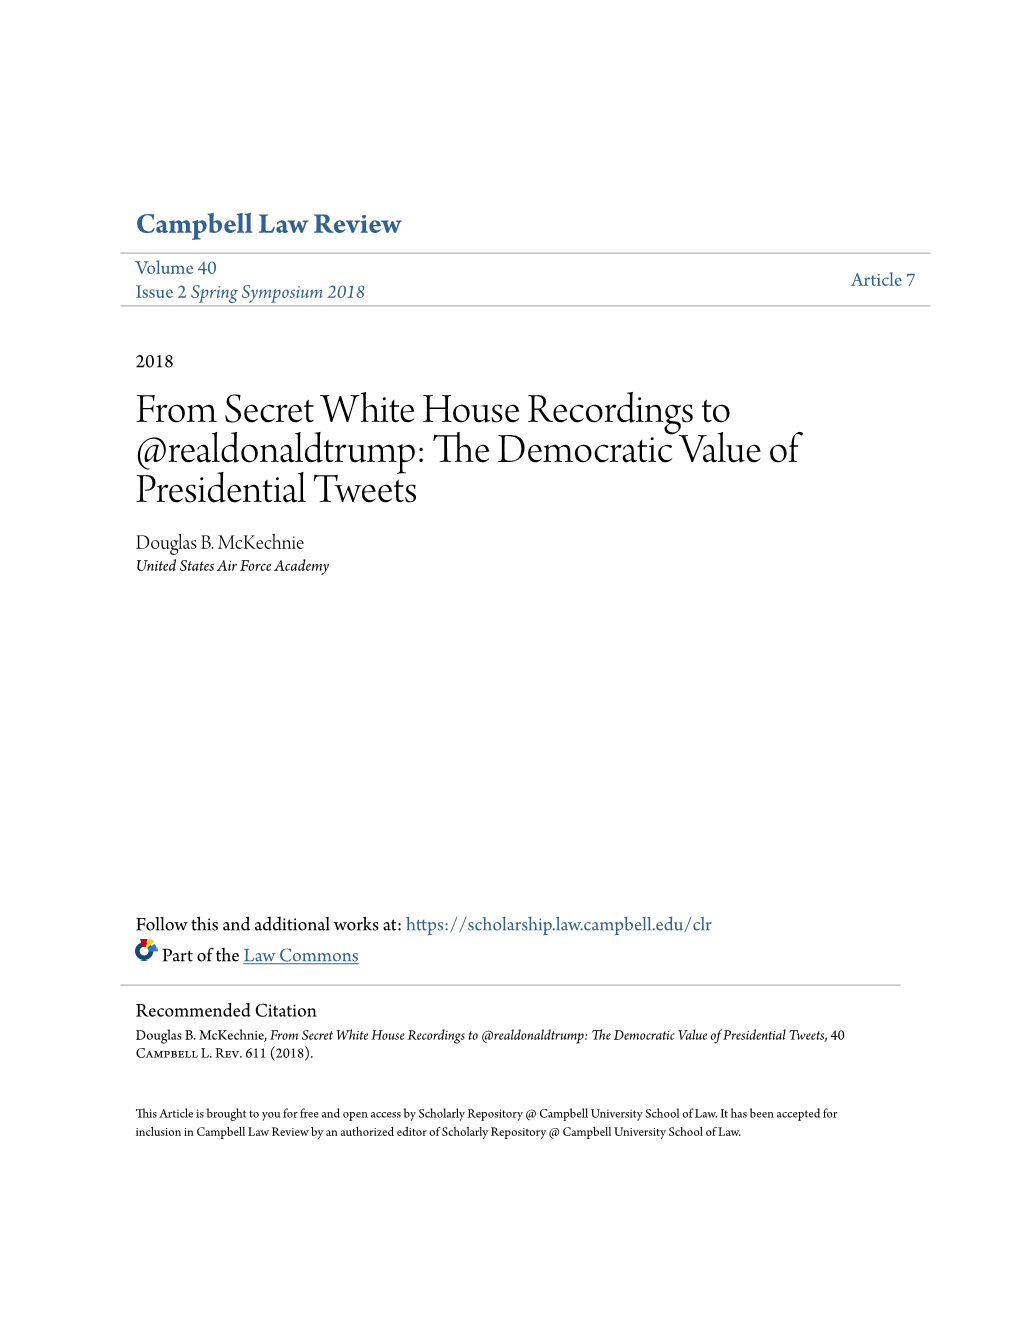 From Secret White House Recordings to @Realdonaldtrump: the Ed Mocratic Value of Presidential Tweets Douglas B